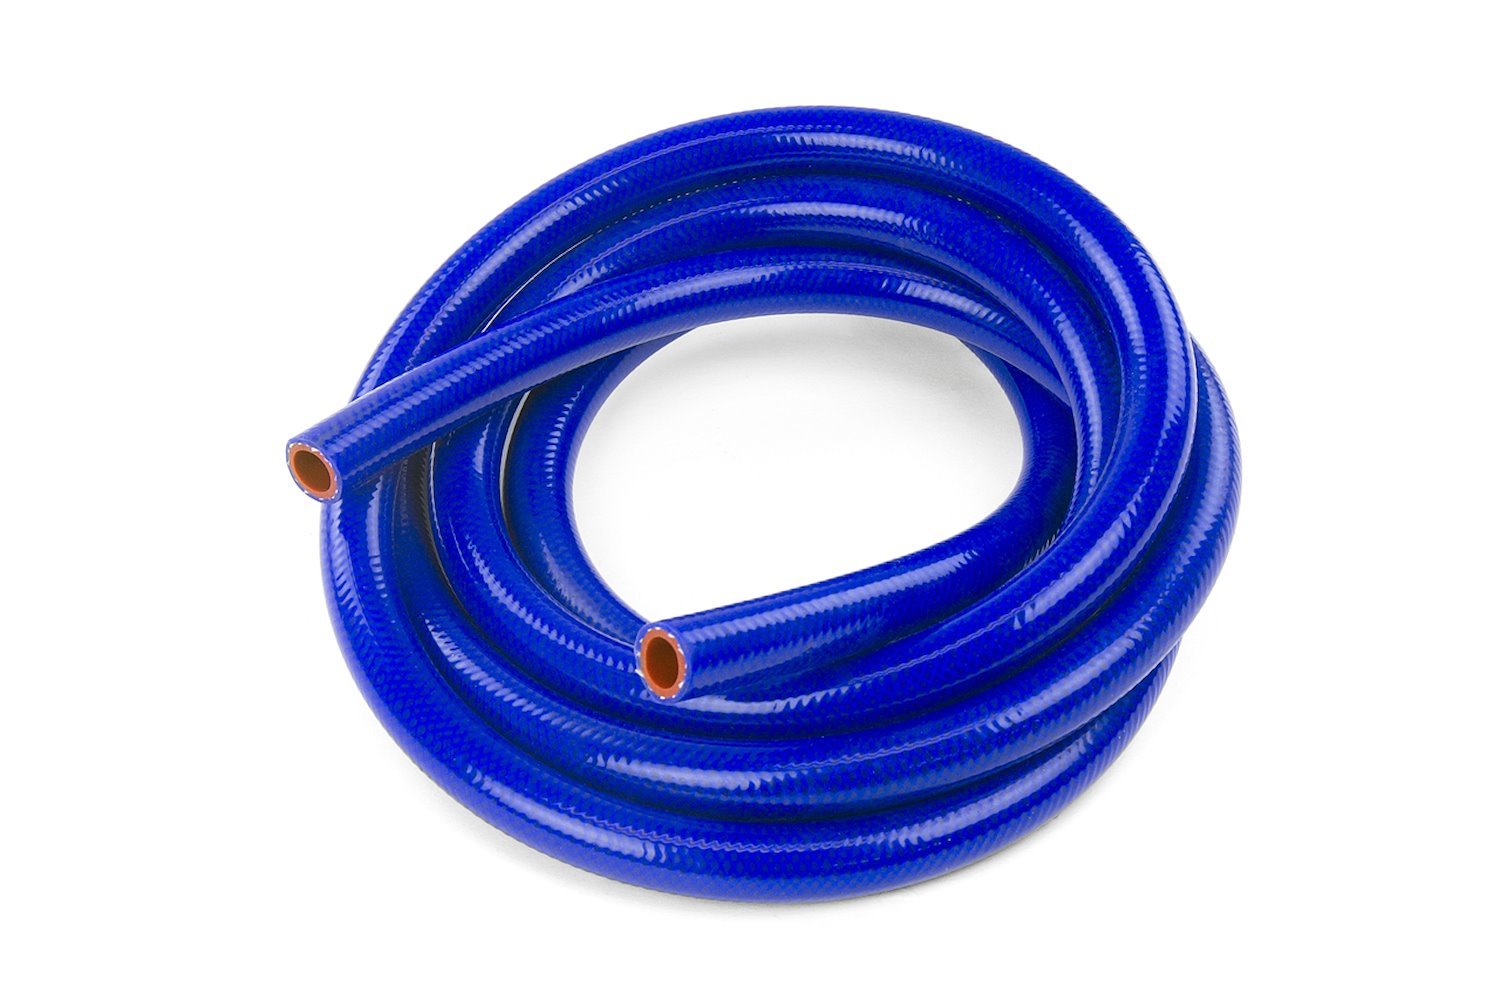 HTHH-013-BLUEx10 Silicone Heater Hose Tubing, High-Temp Reinforced, 1/8 in. ID, 10 ft. Roll, Blue